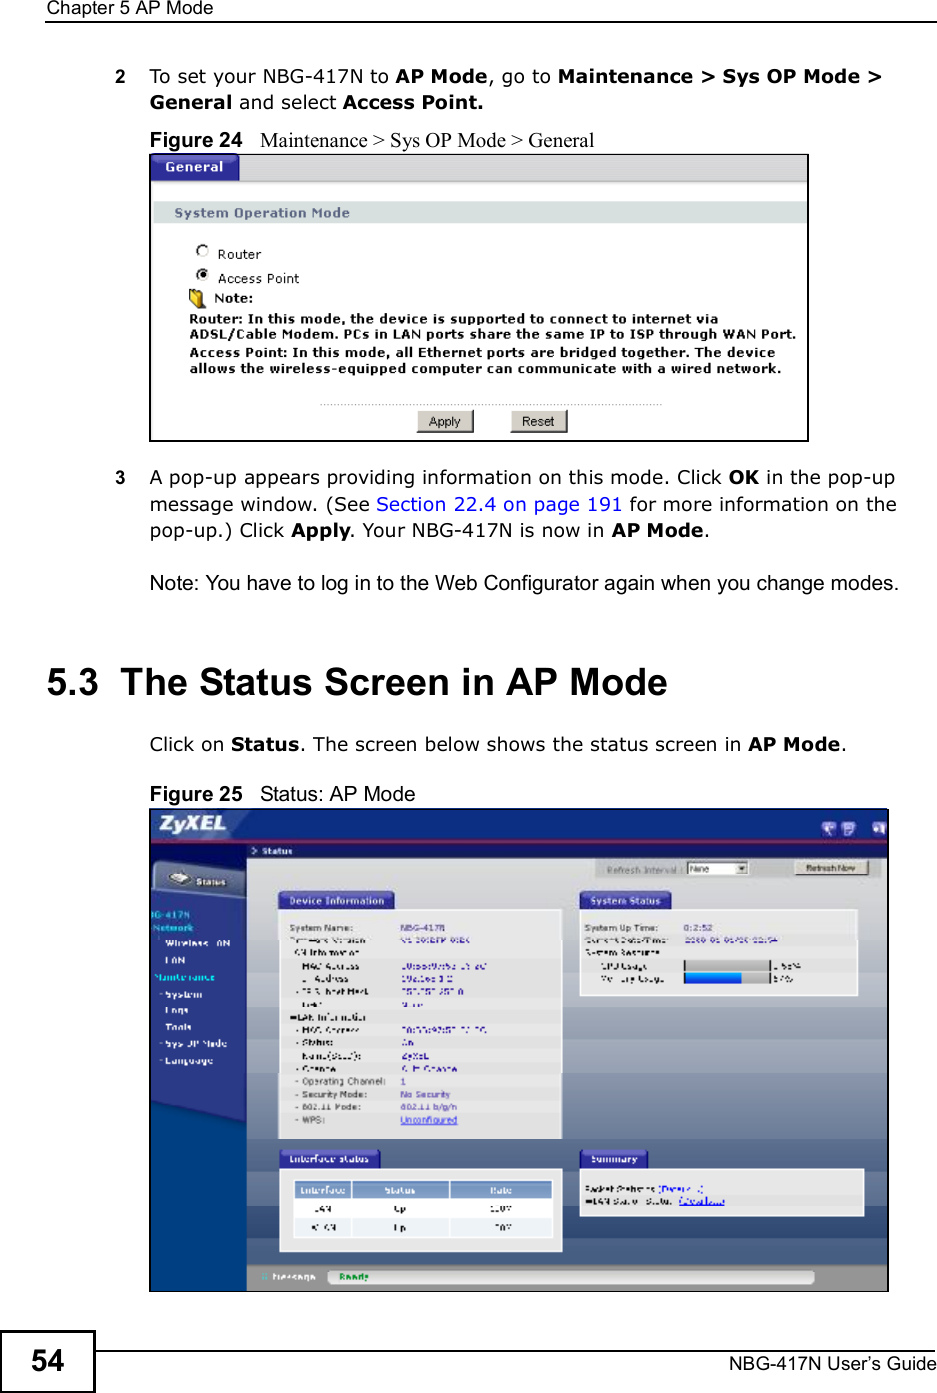 Chapter 5AP ModeNBG-417N User s Guide542To set your NBG-417N to AP Mode, go to Maintenance &gt; Sys OP Mode &gt; General and select Access Point.Figure 24   Maintenance &gt; Sys OP Mode &gt; General3A pop-up appears providing information on this mode. Click OK in the pop-up message window. (See Section 22.4 on page 191 for more information on the pop-up.) Click Apply. Your NBG-417N is now in AP Mode.Note: You have to log in to the Web Configurator again when you change modes.5.3  The Status Screen in AP ModeClick on Status. The screen below shows the status screen in AP Mode. Figure 25   Status: AP Mode 